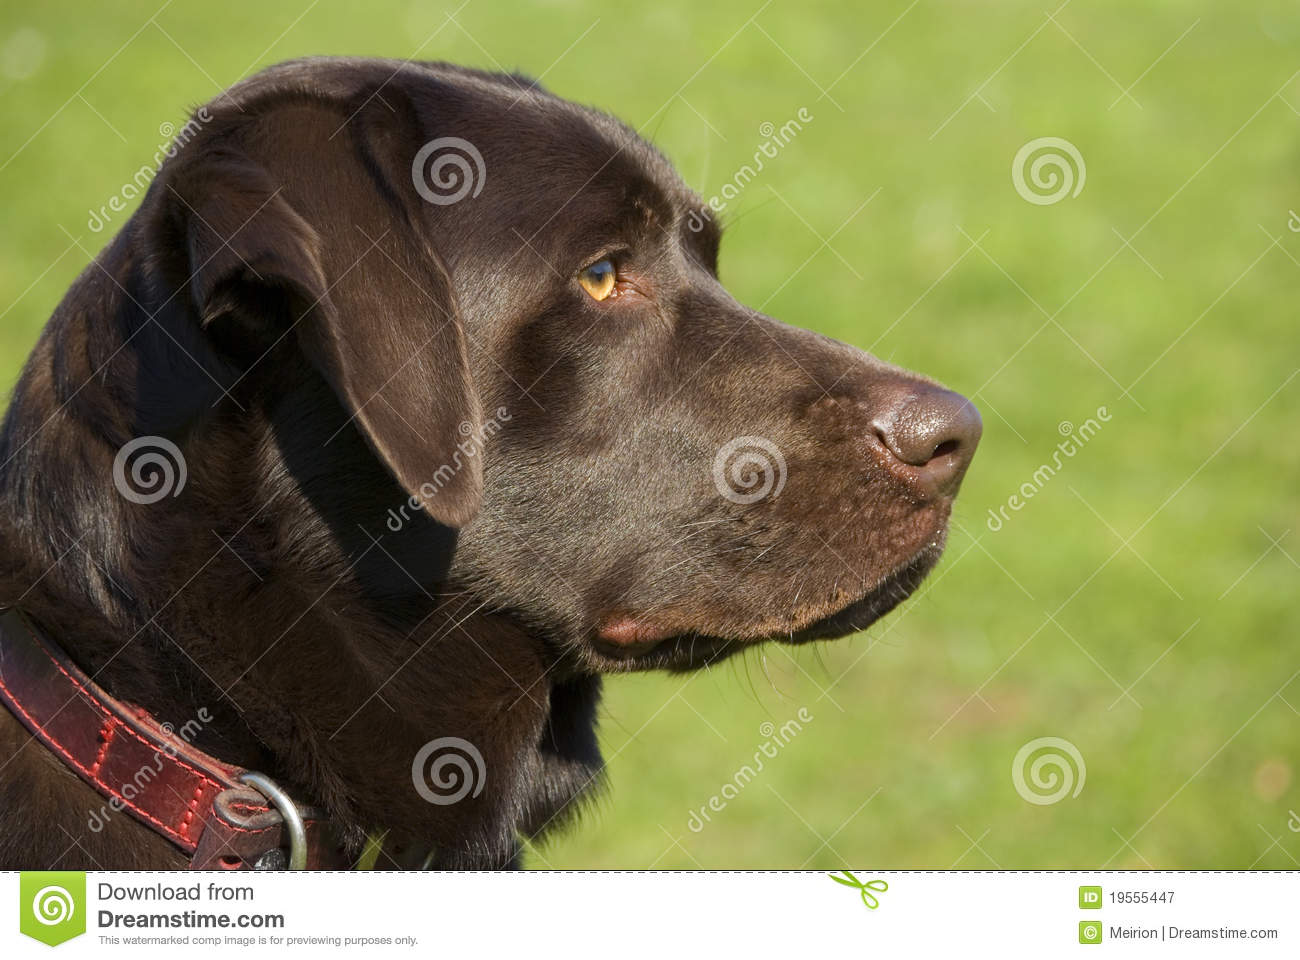 Chocolate Lab Royalty Free Stock Photography   Image  19555447